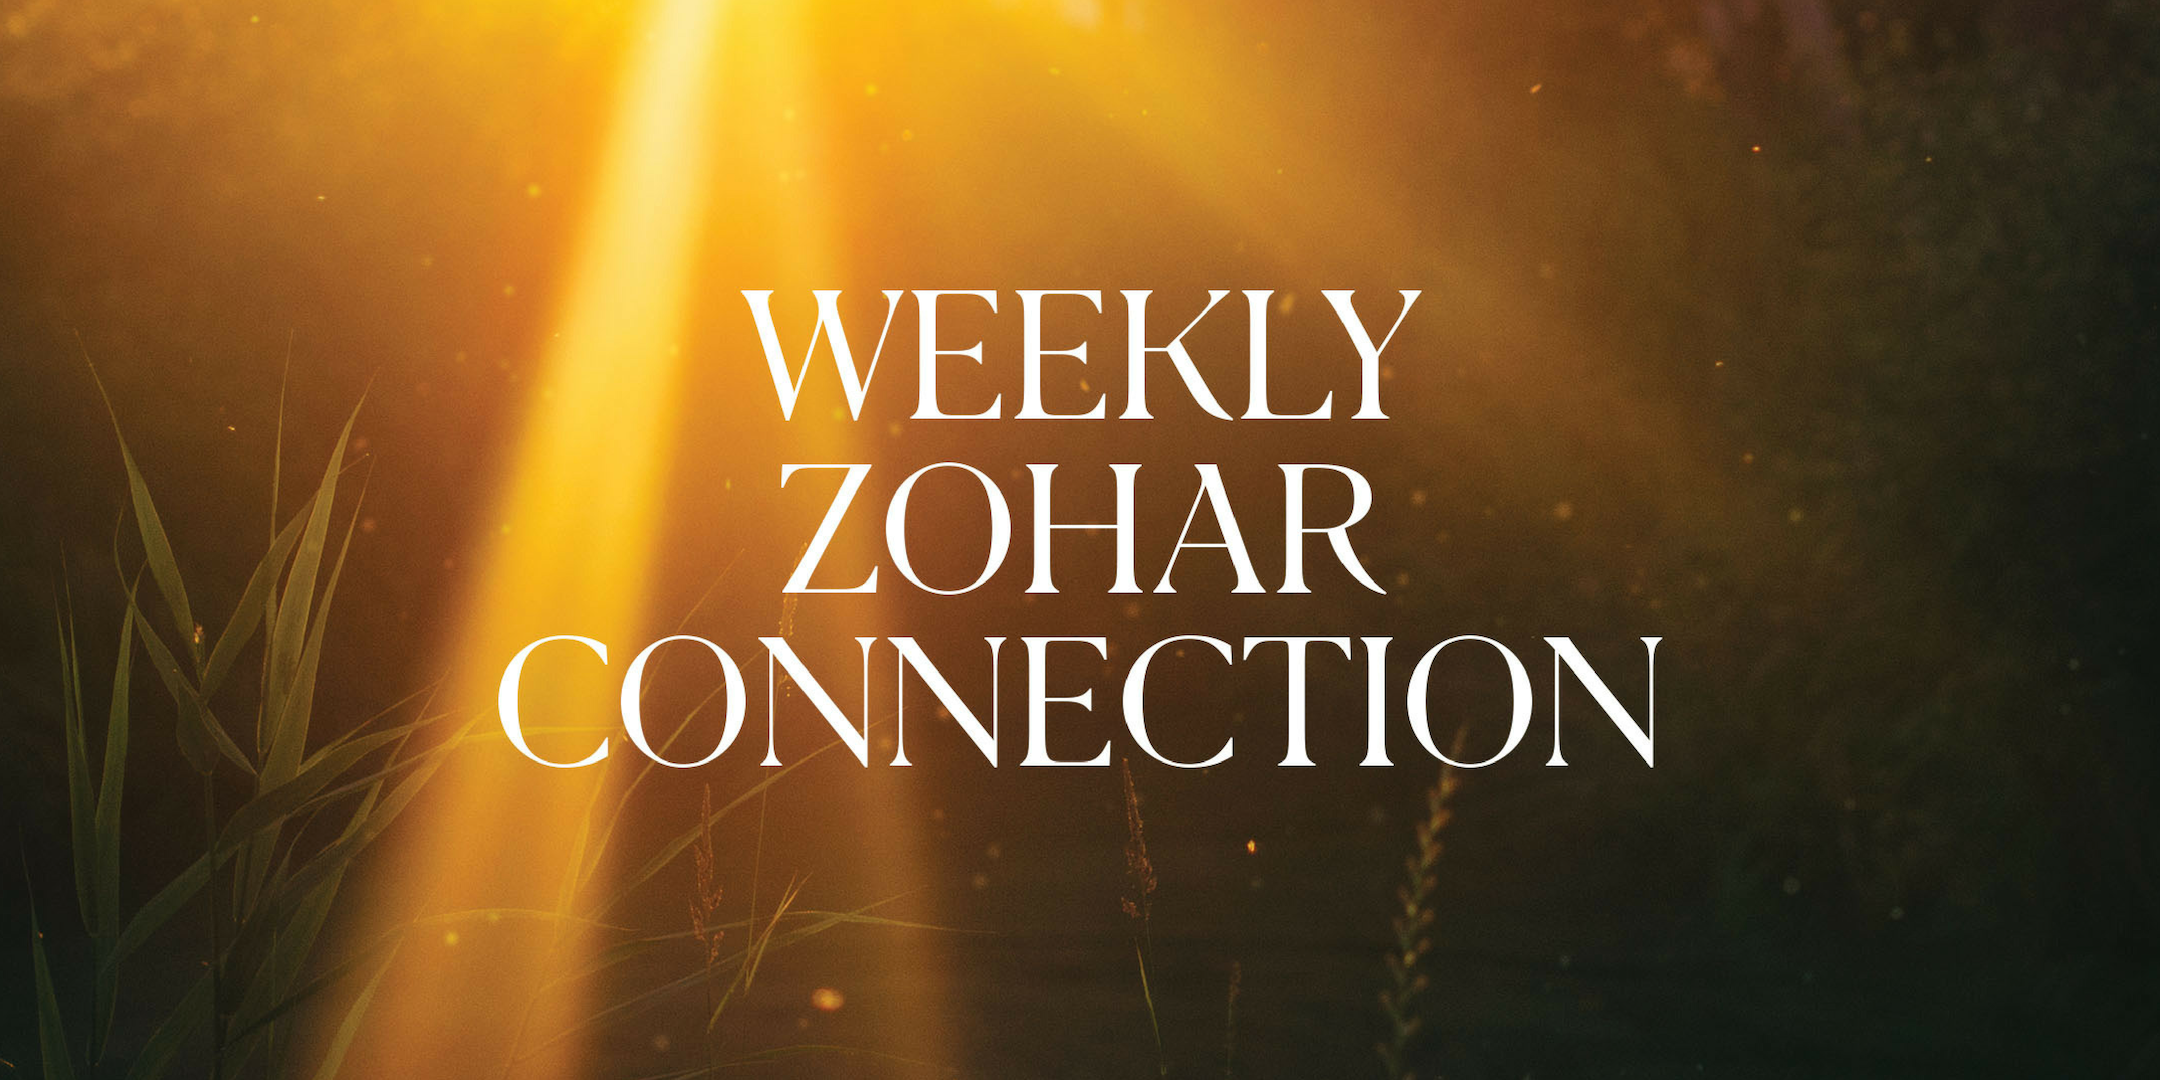 Weekly Zohar Connection 6/8/2020 - MIAMI